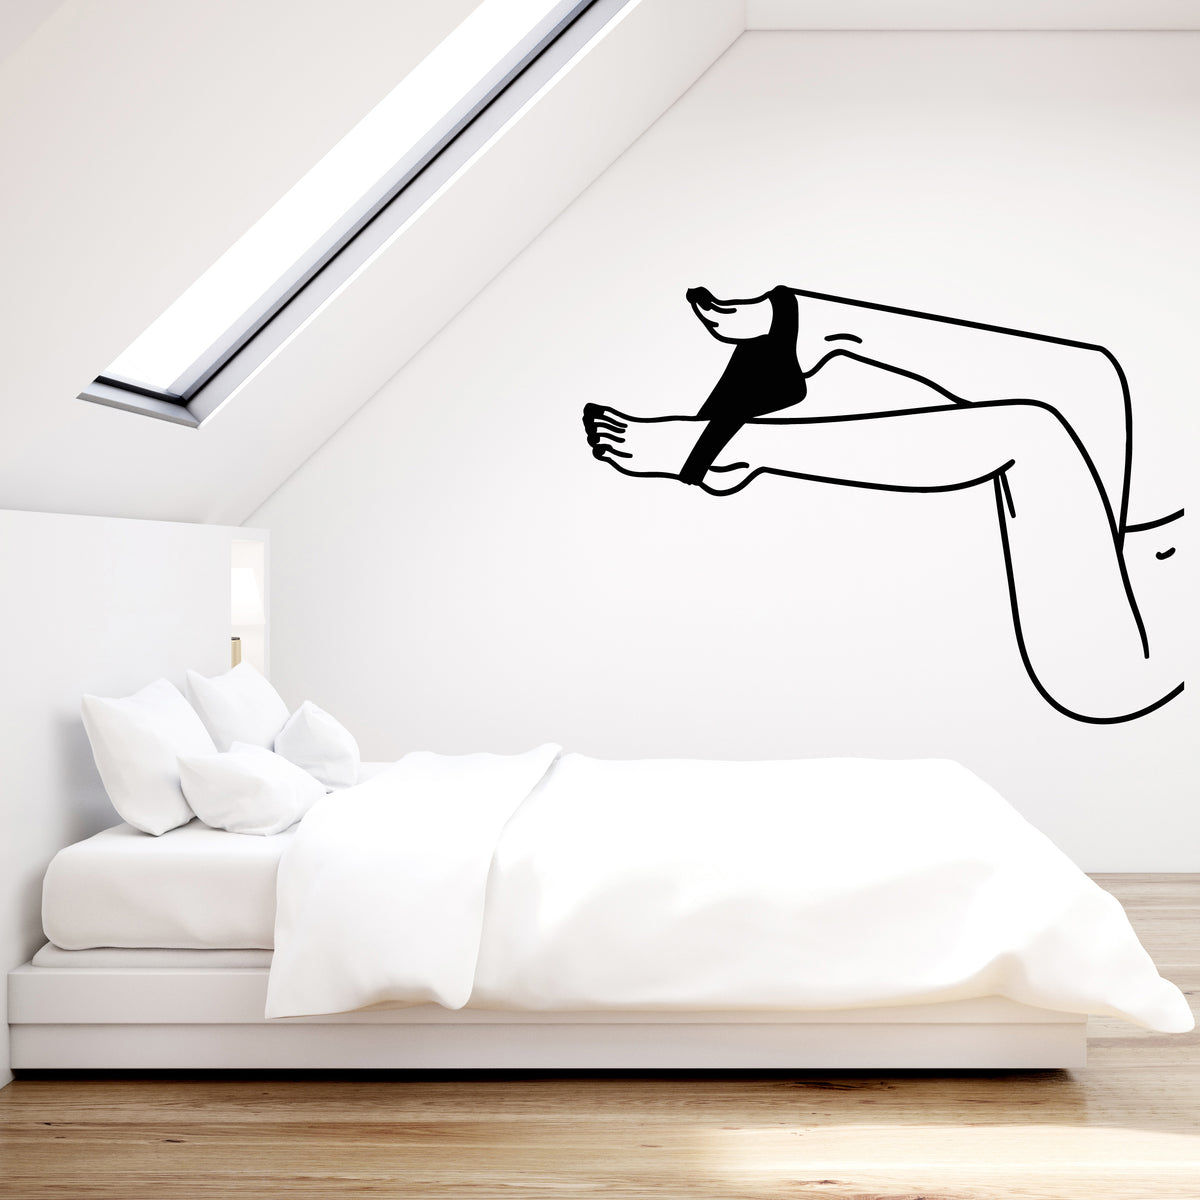 Vinyl Wall Decal Strip Sexy Hot Girl Naked Woman Adult Stickers